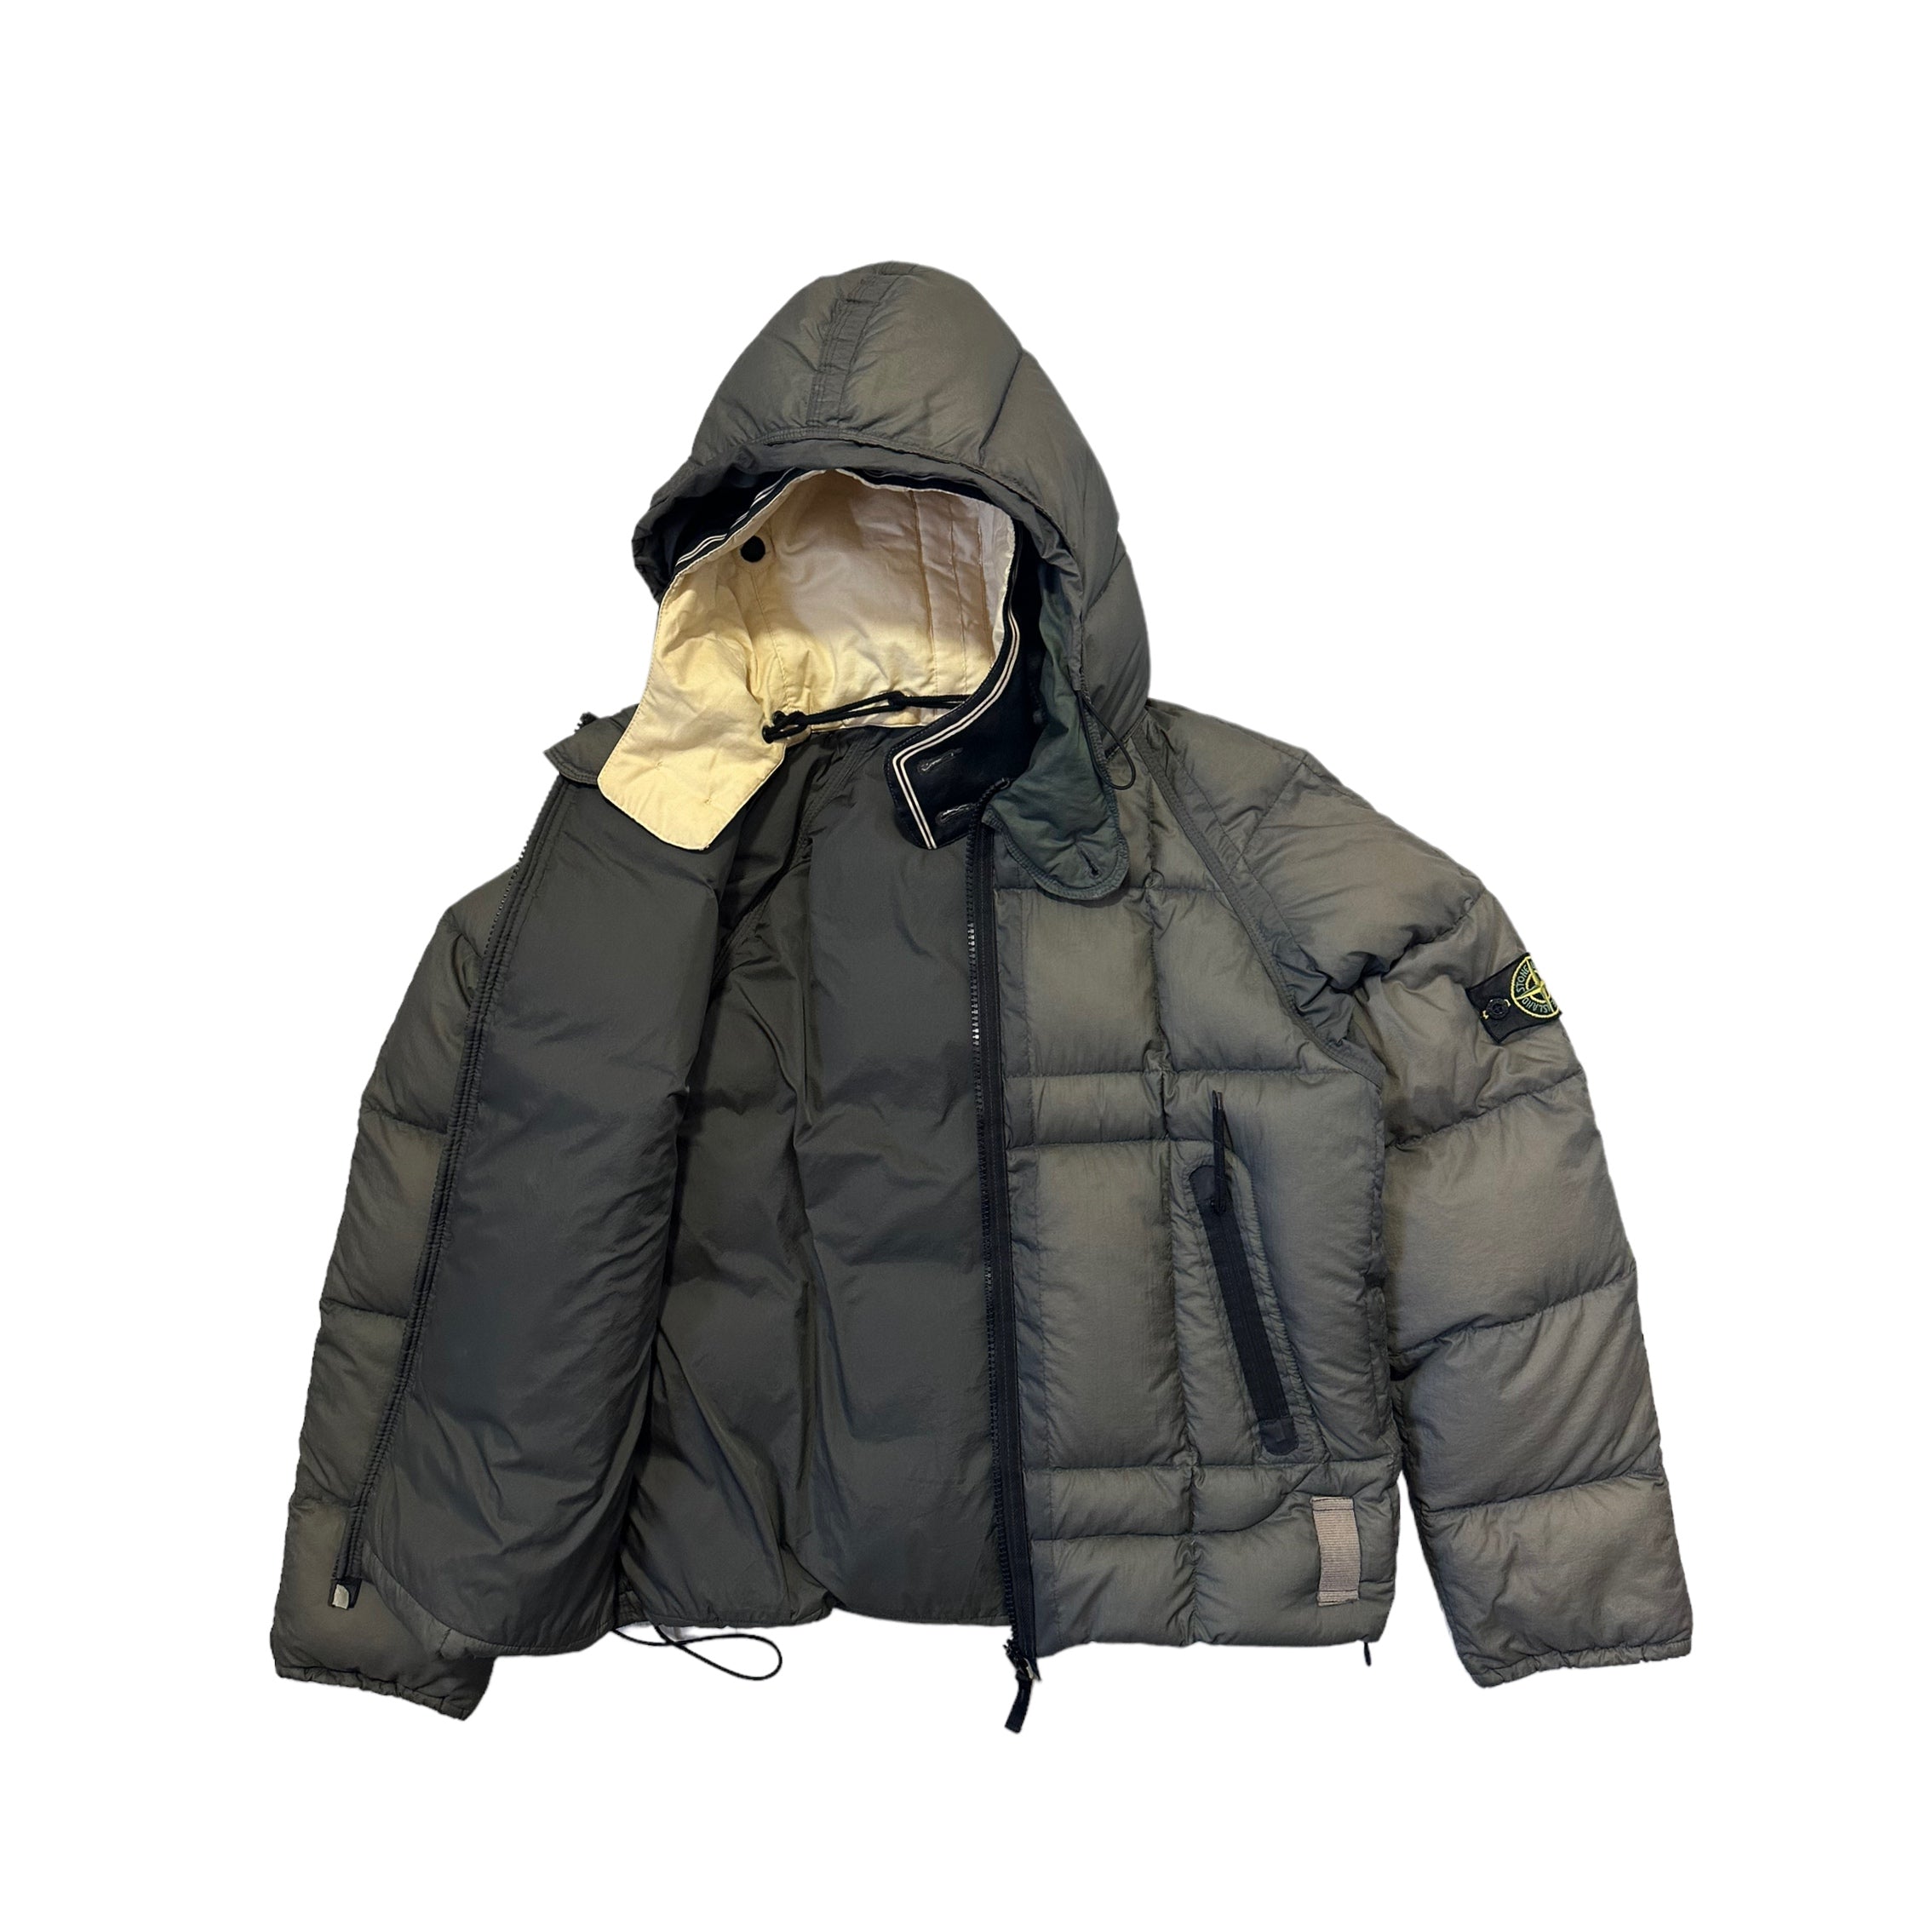 Stone Island Opaque Nylon Tela Goose Down Jacket from A/W 2006 with Dutch Rope Hood Inner